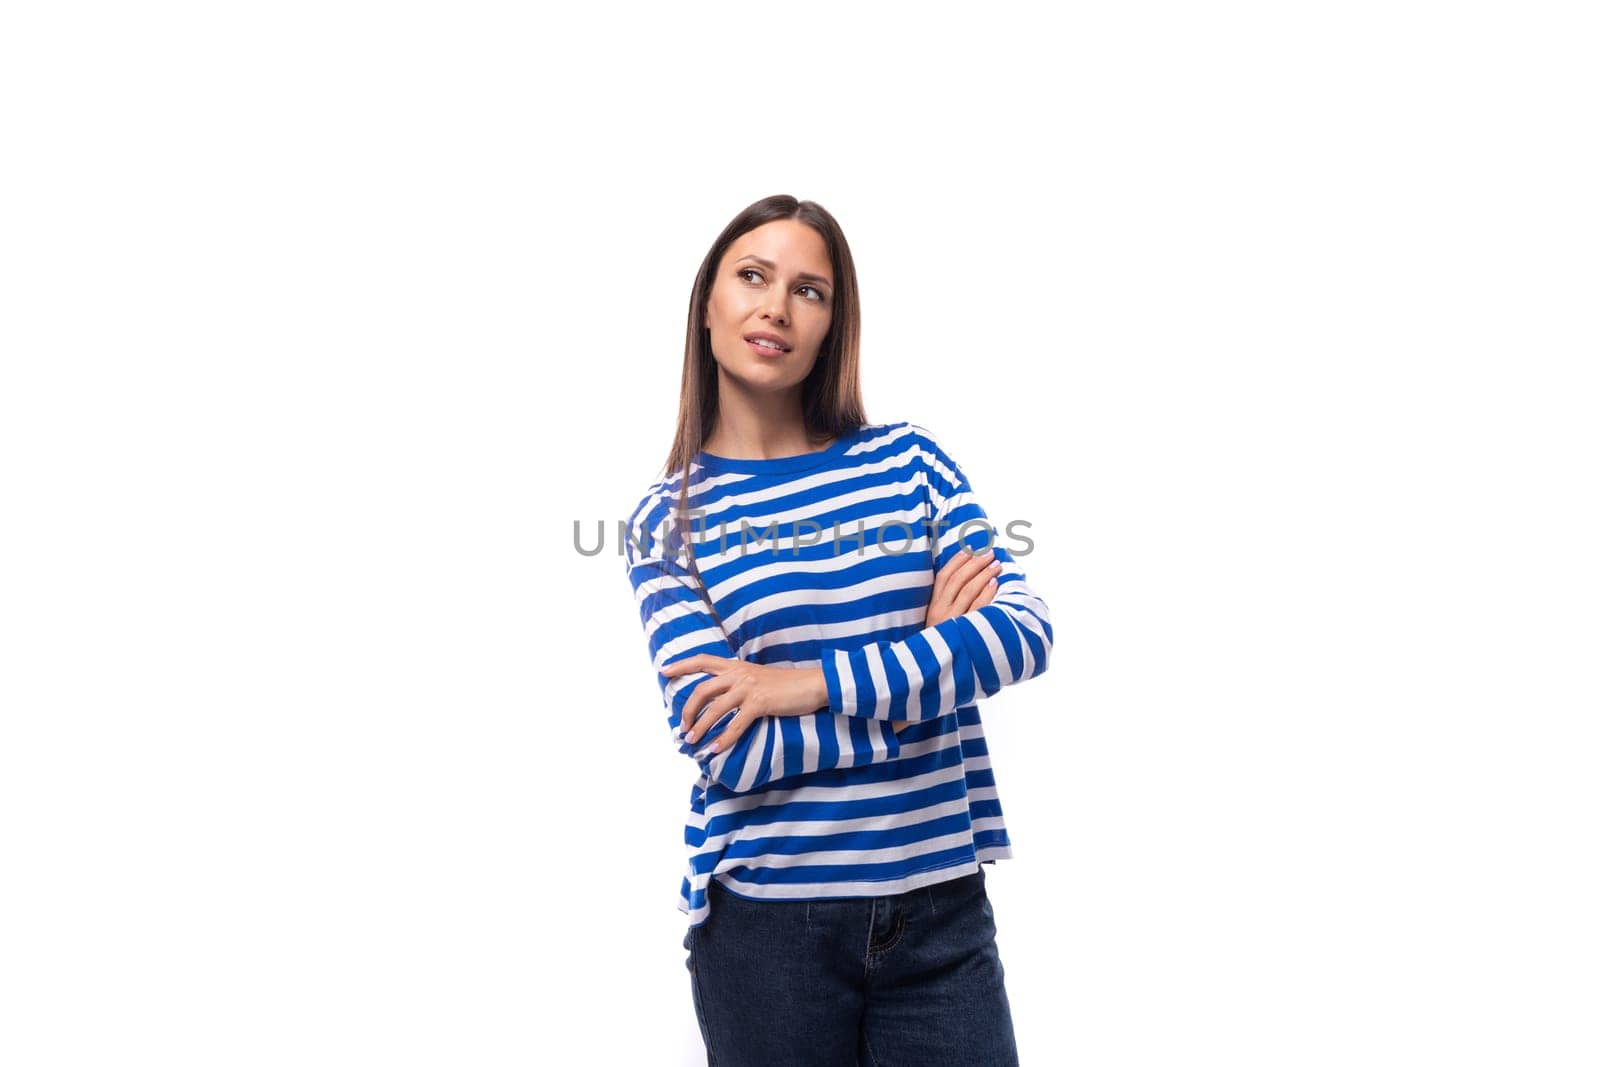 portrait of a young pretty caucasian woman with dark hair dressed in a blue striped sweatshirt on a white background. people lifestyle concept.